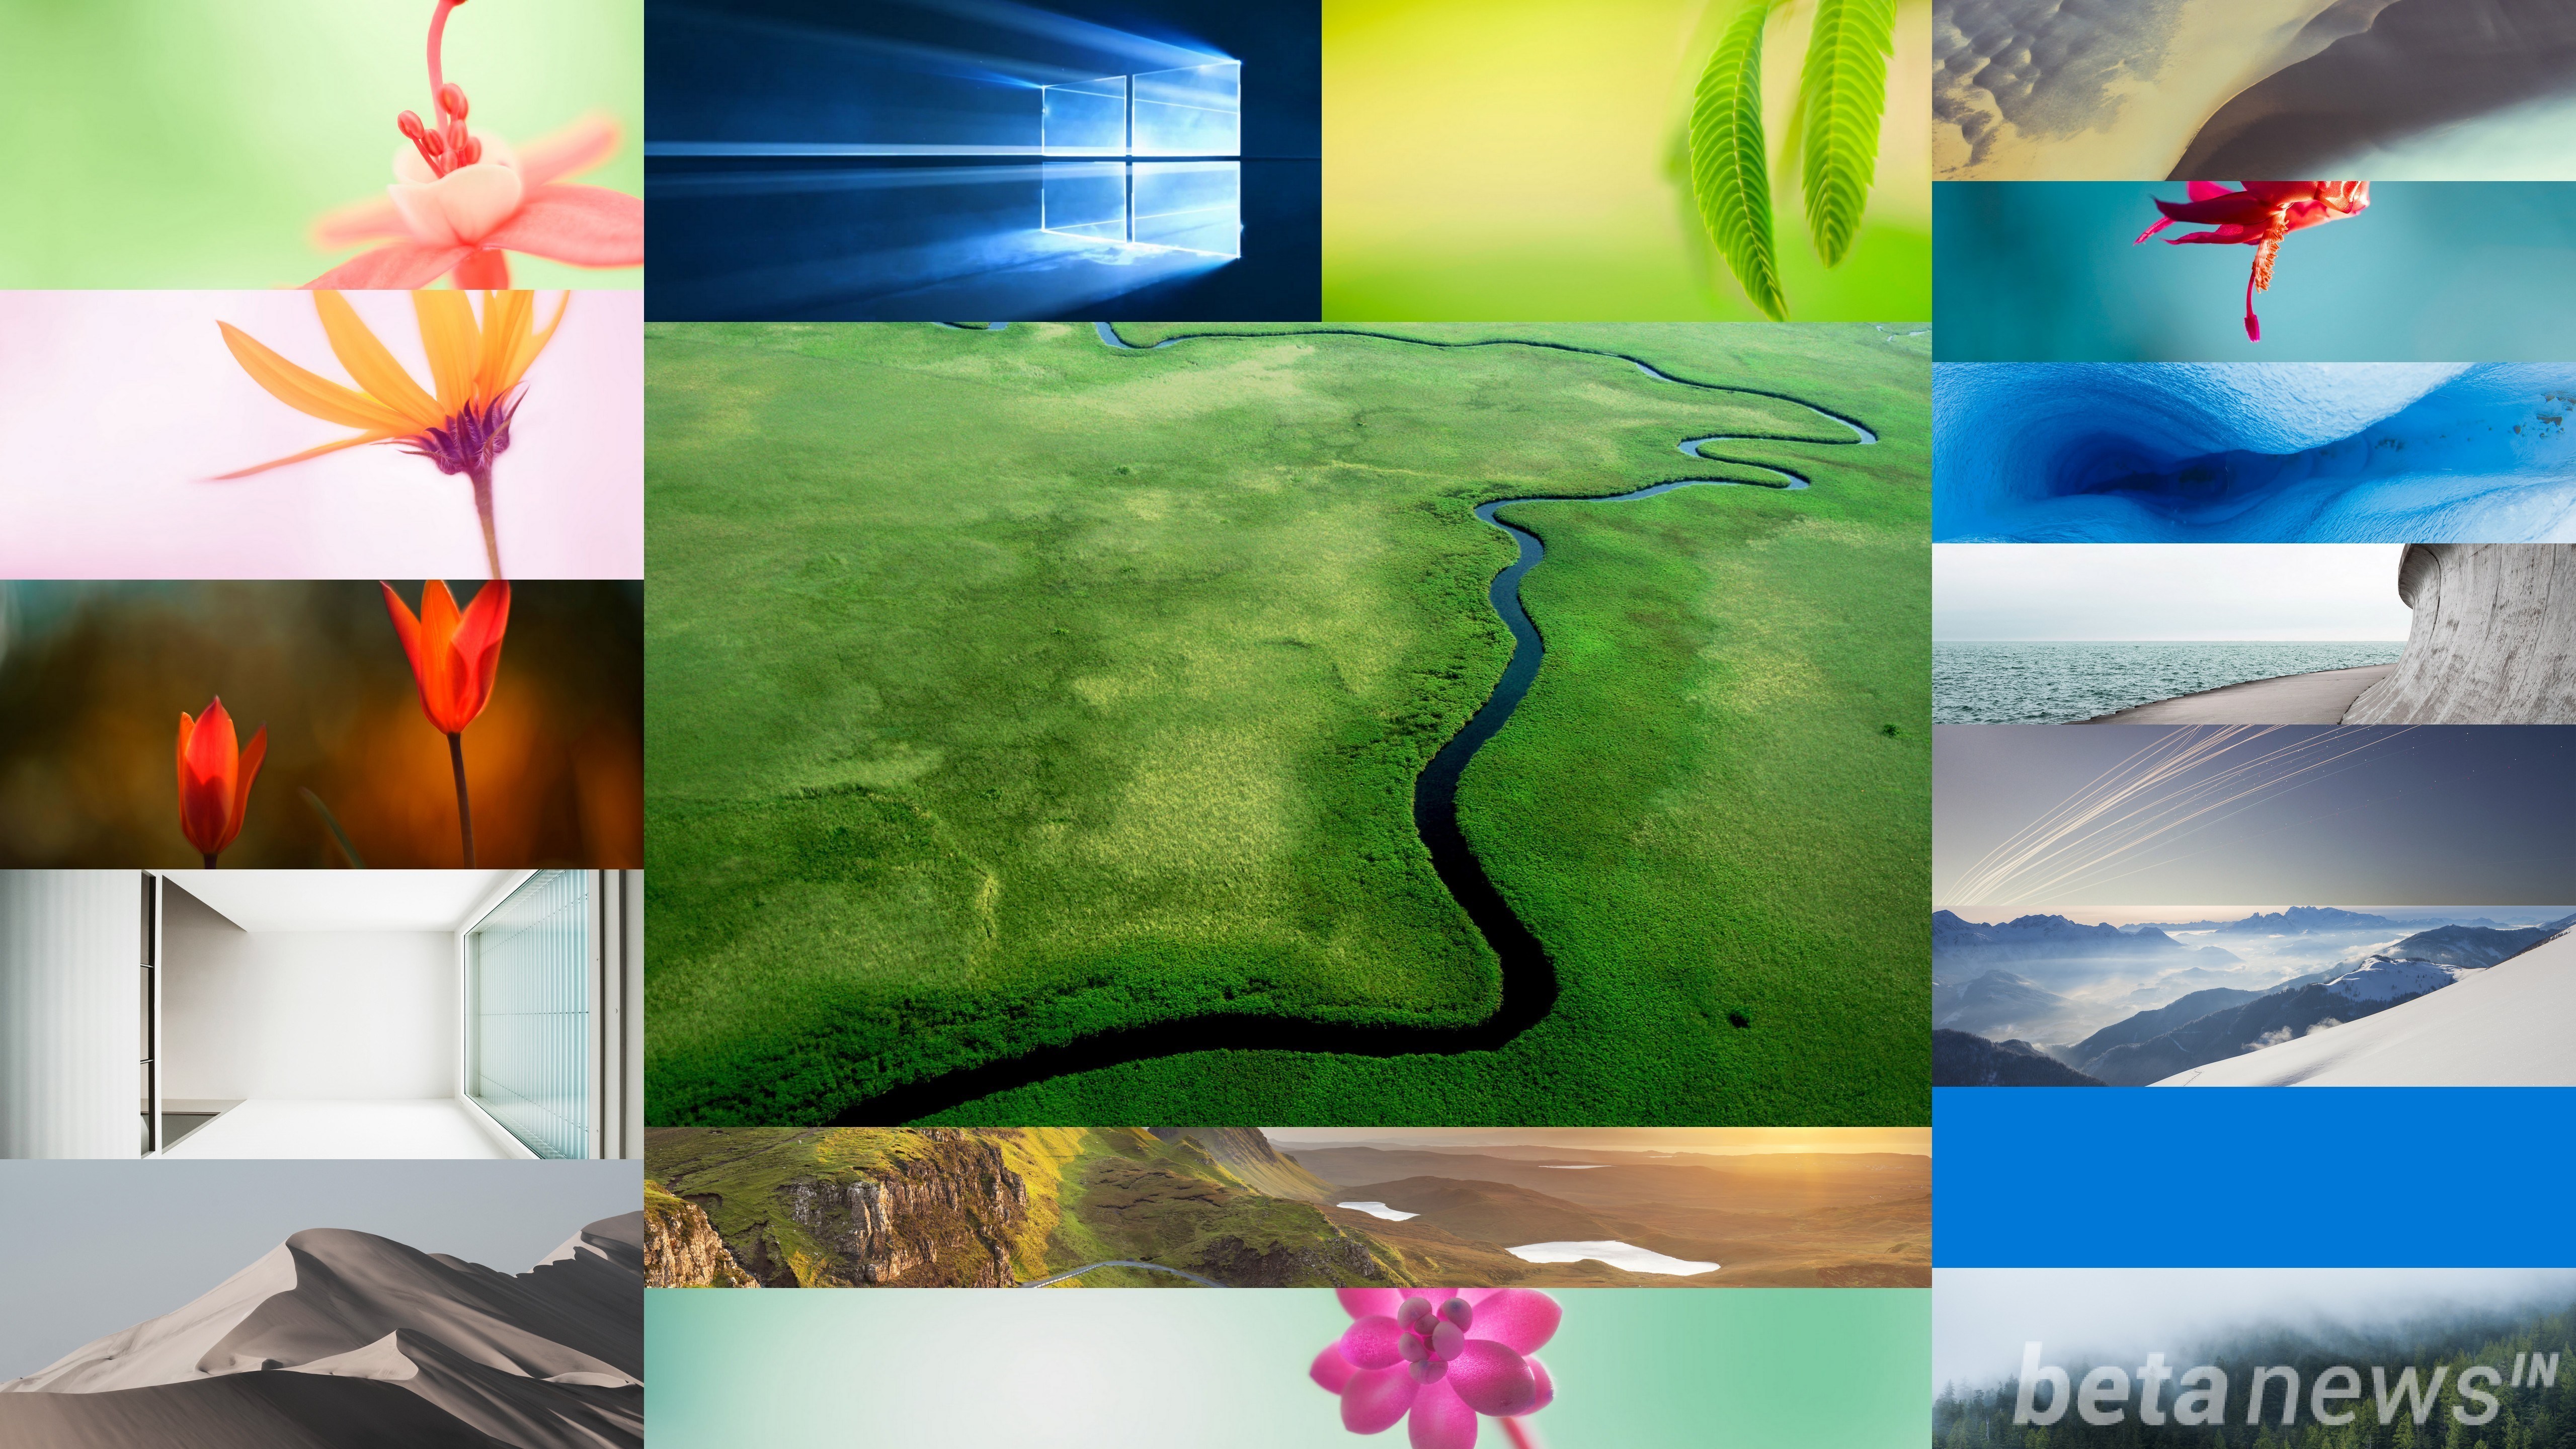 Download Windows 10 Wallpapers Pack 18 Win 10 Wallpapers